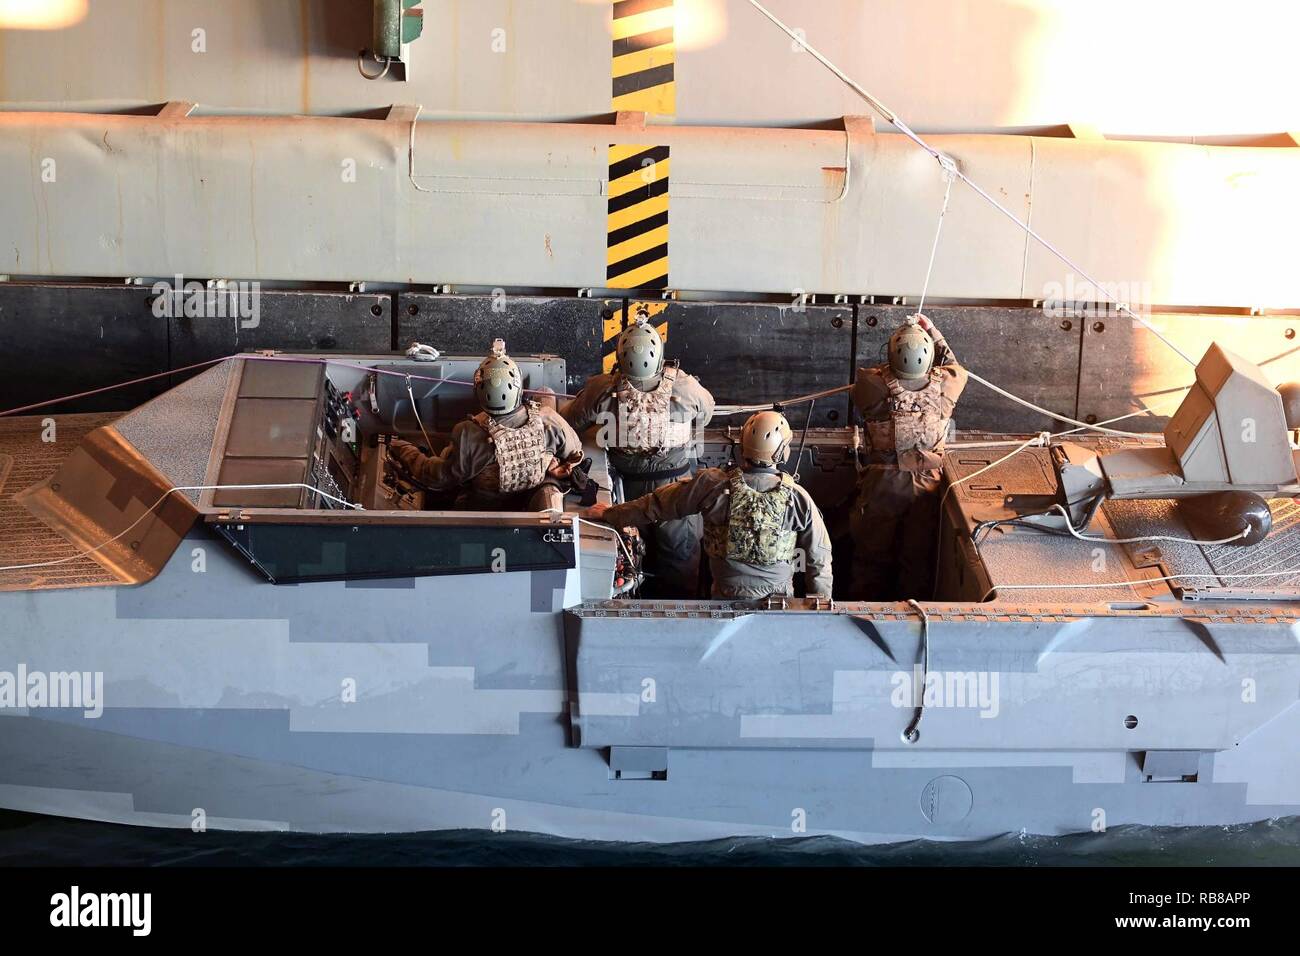 ATLANTIC OCEAN (Dec. 09, 2016) – Special Warfare Combatant-craft Crewmen (SWCC) with Special Boat Team (SBT) 20 secure lines in the well deck aboard the amphibious dock landing ship USS Carter Hall (LSD 50). The team practiced mooring and maneuvering their craft inside the ship’s well deck. Carter Hall is underway with the Bataan Amphibious Readiness Group (ARG) participating in ARG/Marine Expeditionary Unit Exercise (ARG/MEUEX). Stock Photo